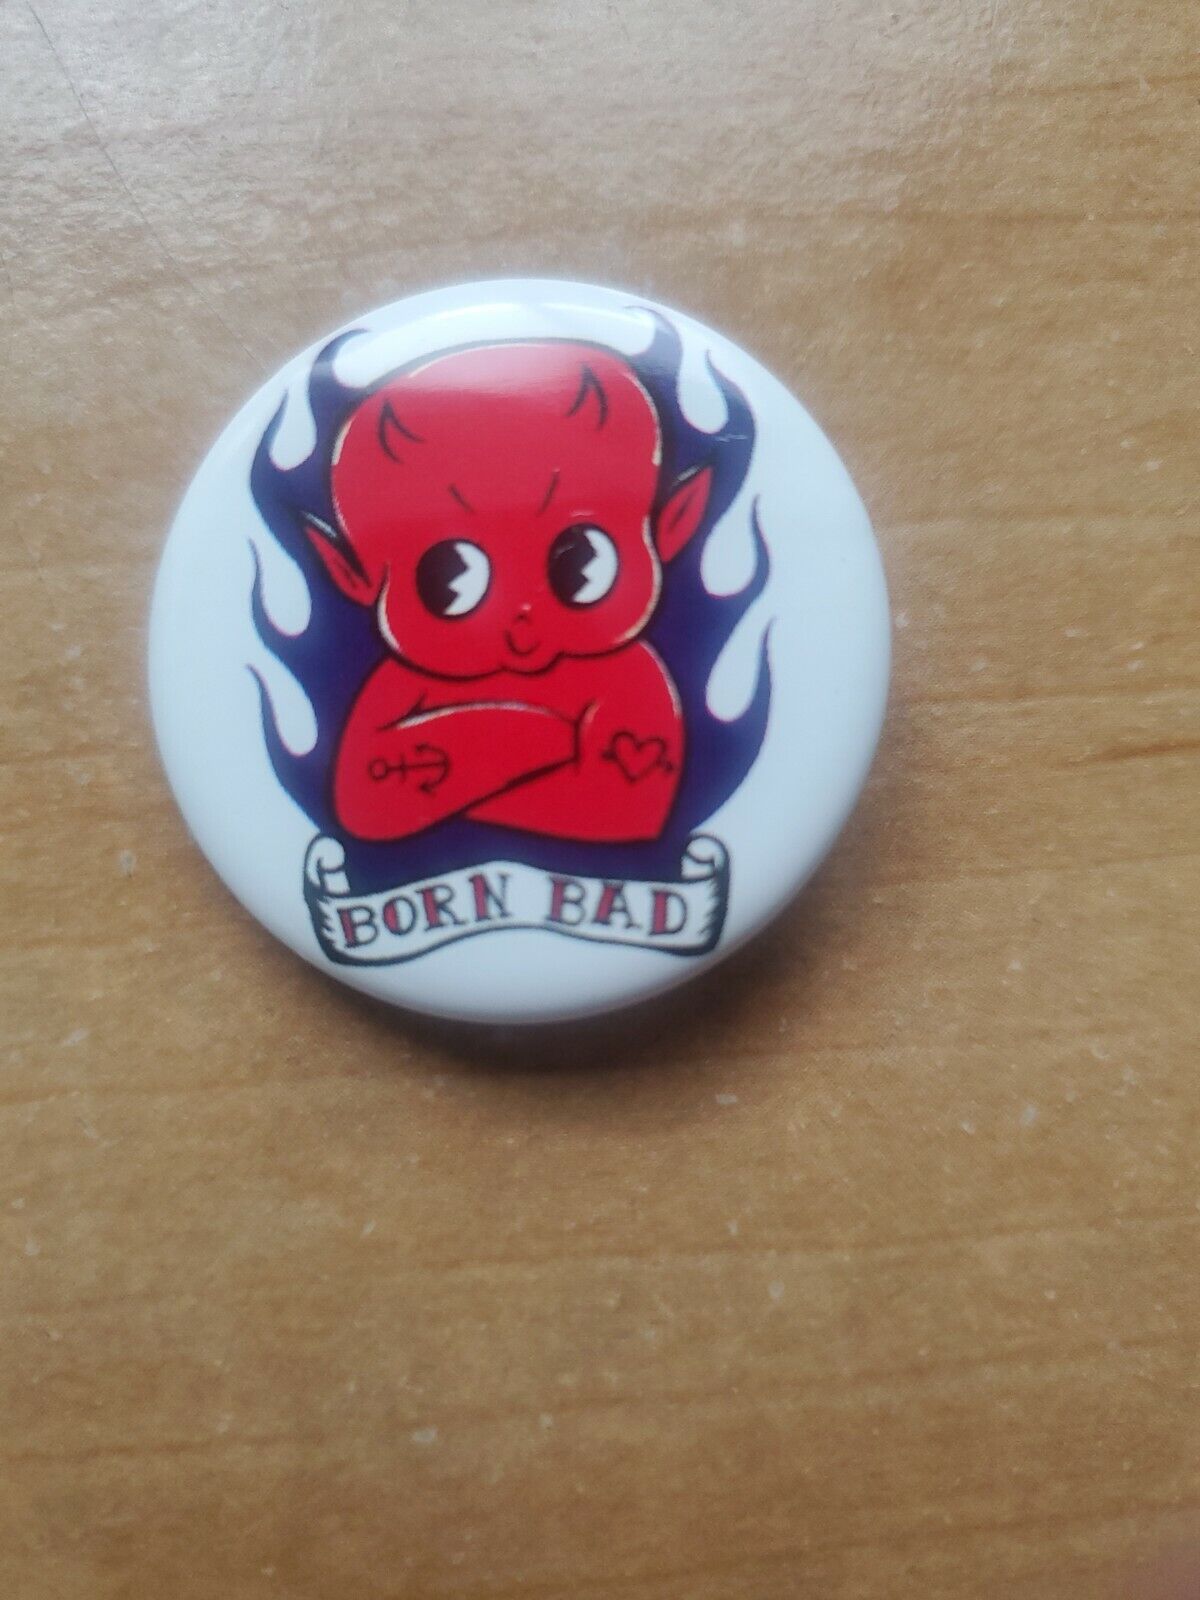 Born Bad Baby Devil doll with flames Button Pin by Archaic Smile artwork art